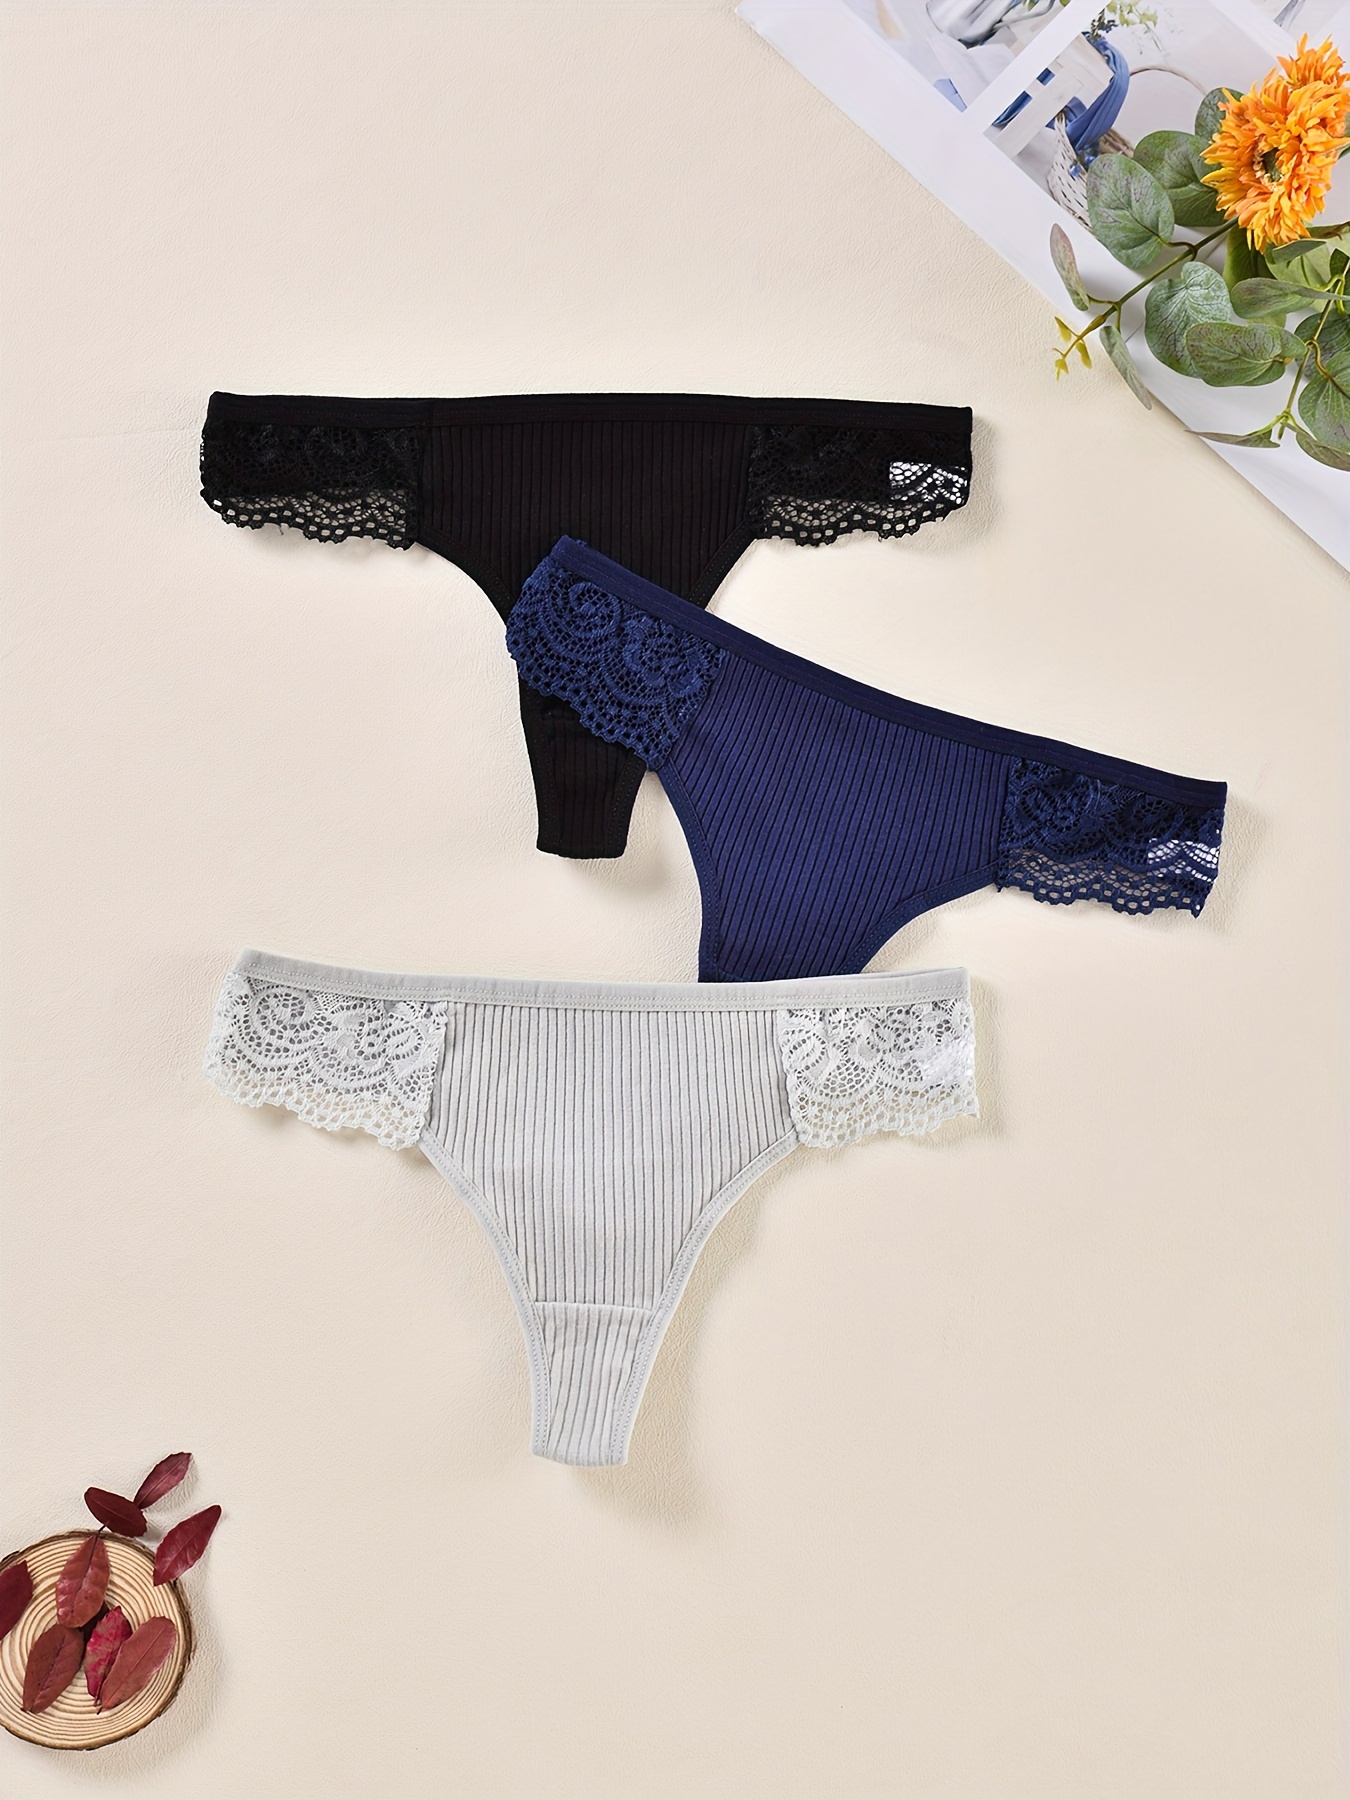 3pcs Lace Stitching Thongs, Soft & Comfy Stretchy Intimates Panties,  Women's Lingerie & Underwear